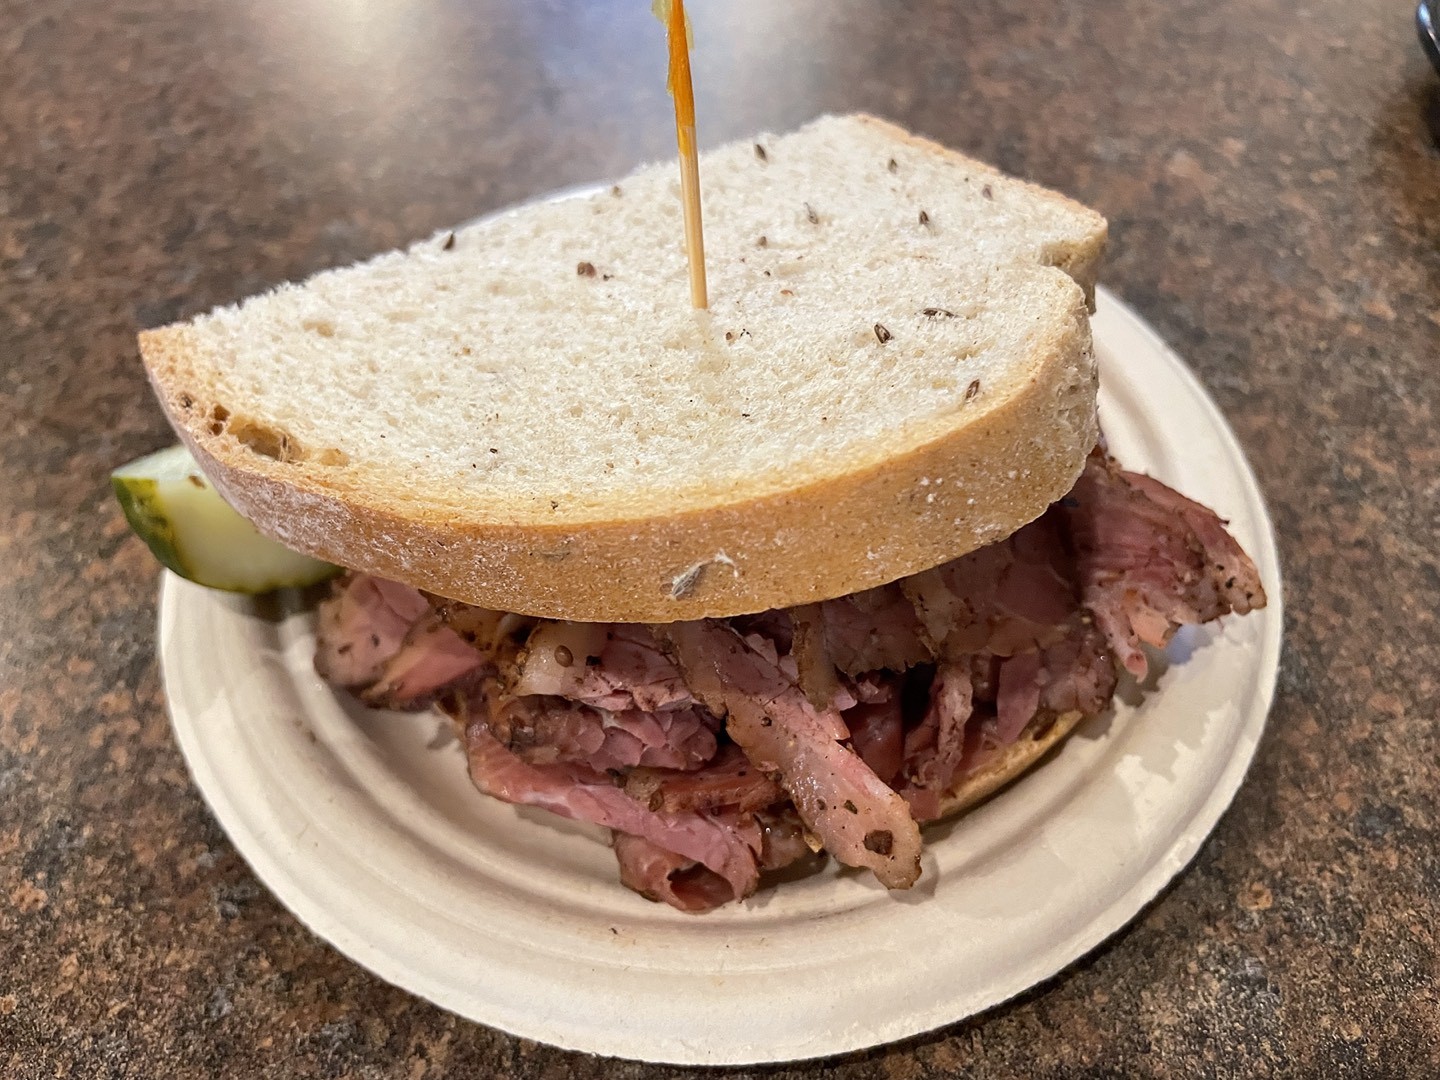 The Woody Allen is a classic New York deli sandwich, peppery beef pastrami on rye bread, both made in-house.